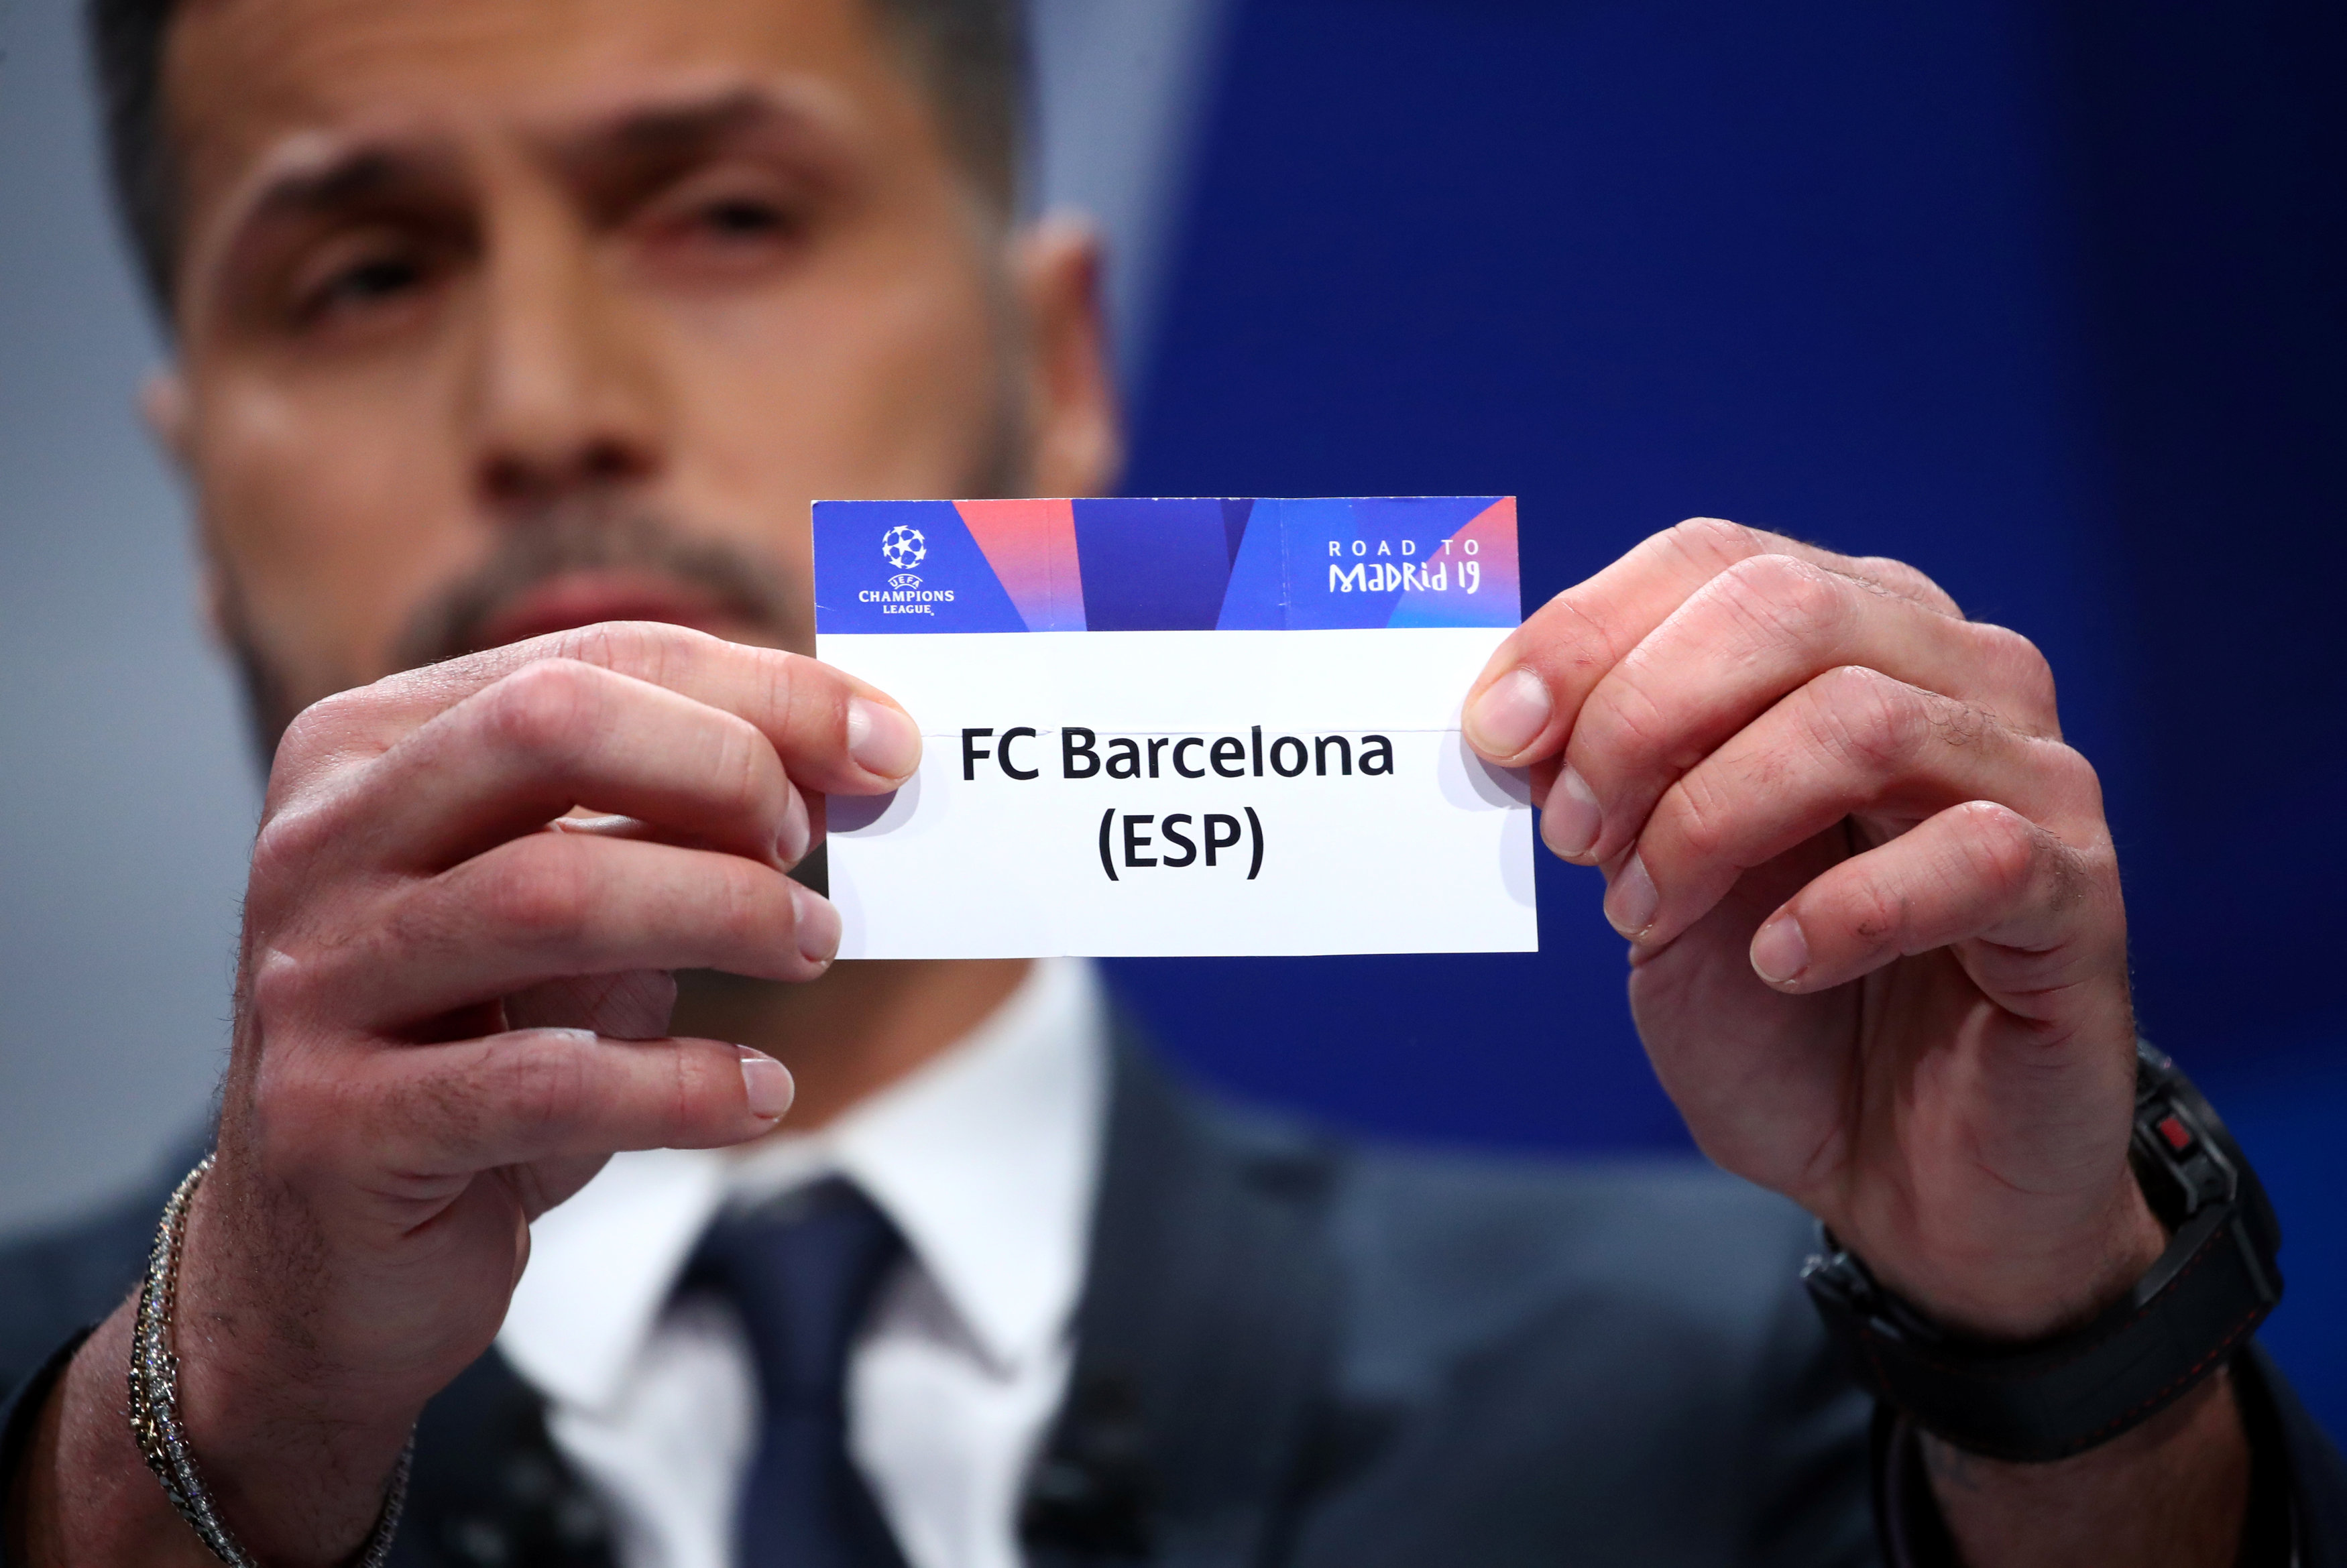 FC Barcelona's named gets drawn to play Manchester United in the Champions League quarterfinal